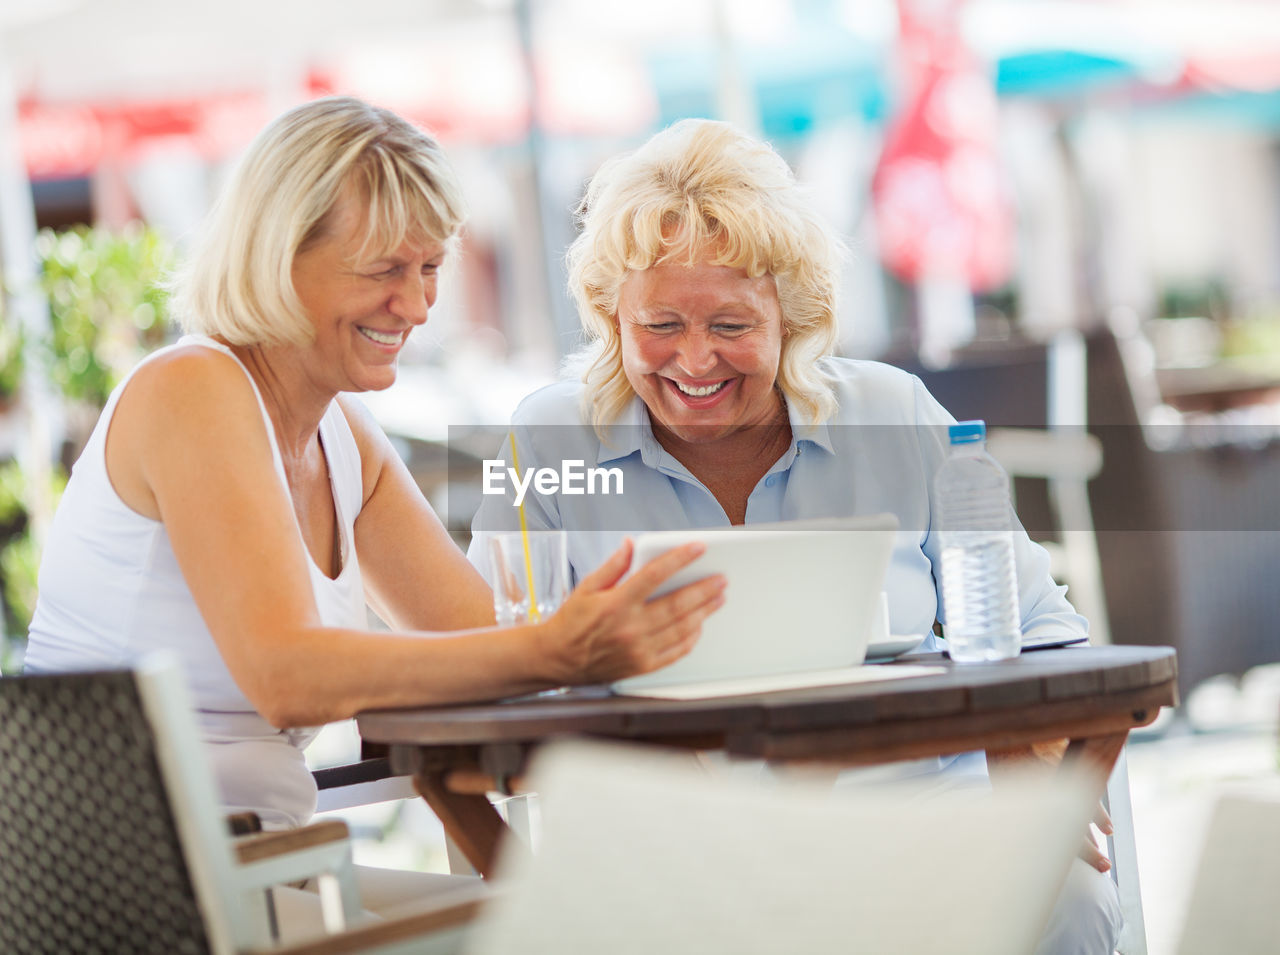 Smiling females using digital tablet at table in cafe